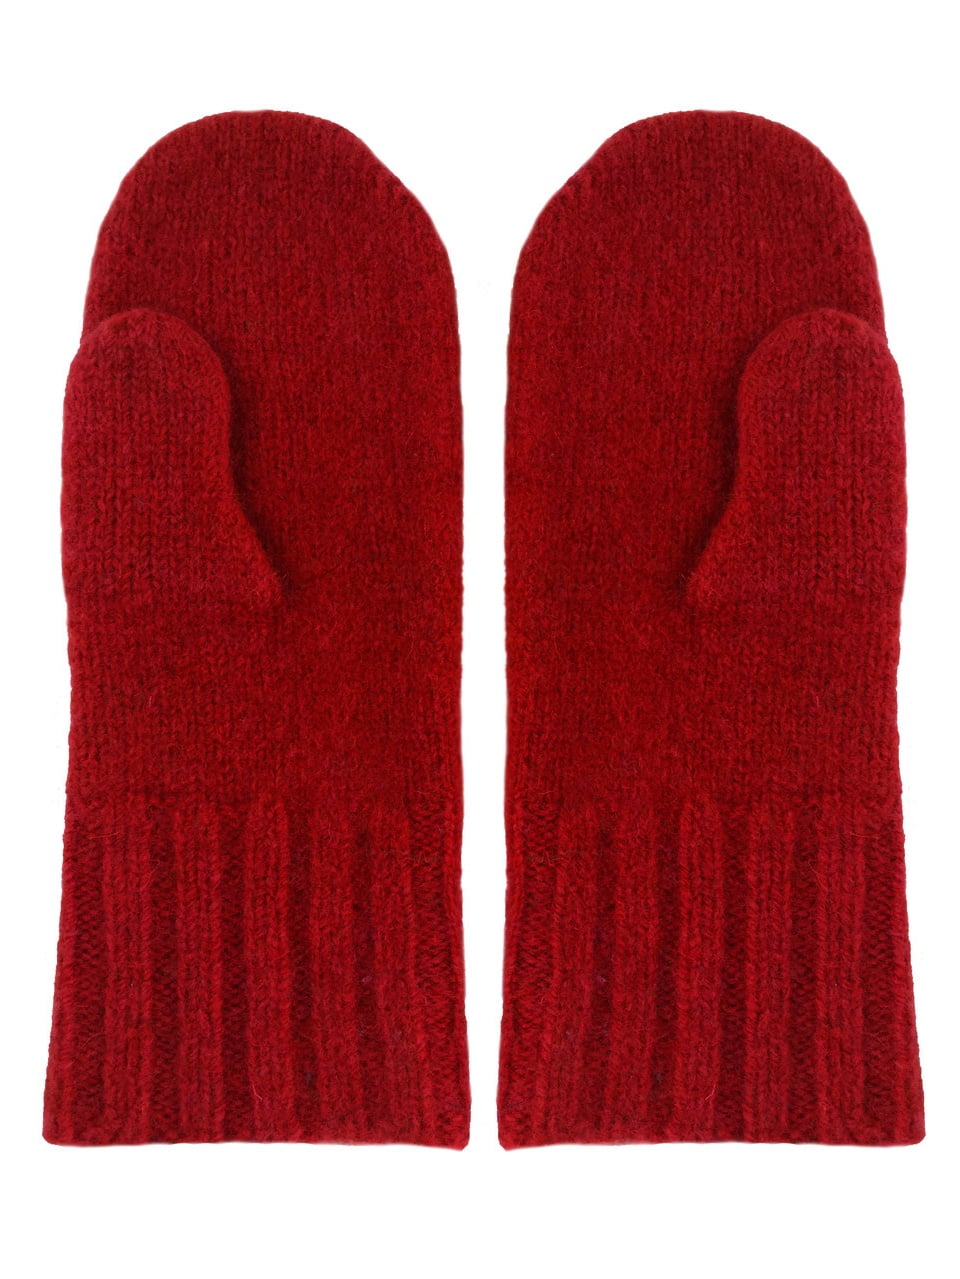 Beautiful Soft and Warm Felted Wool Mittens for 3-5 year olds